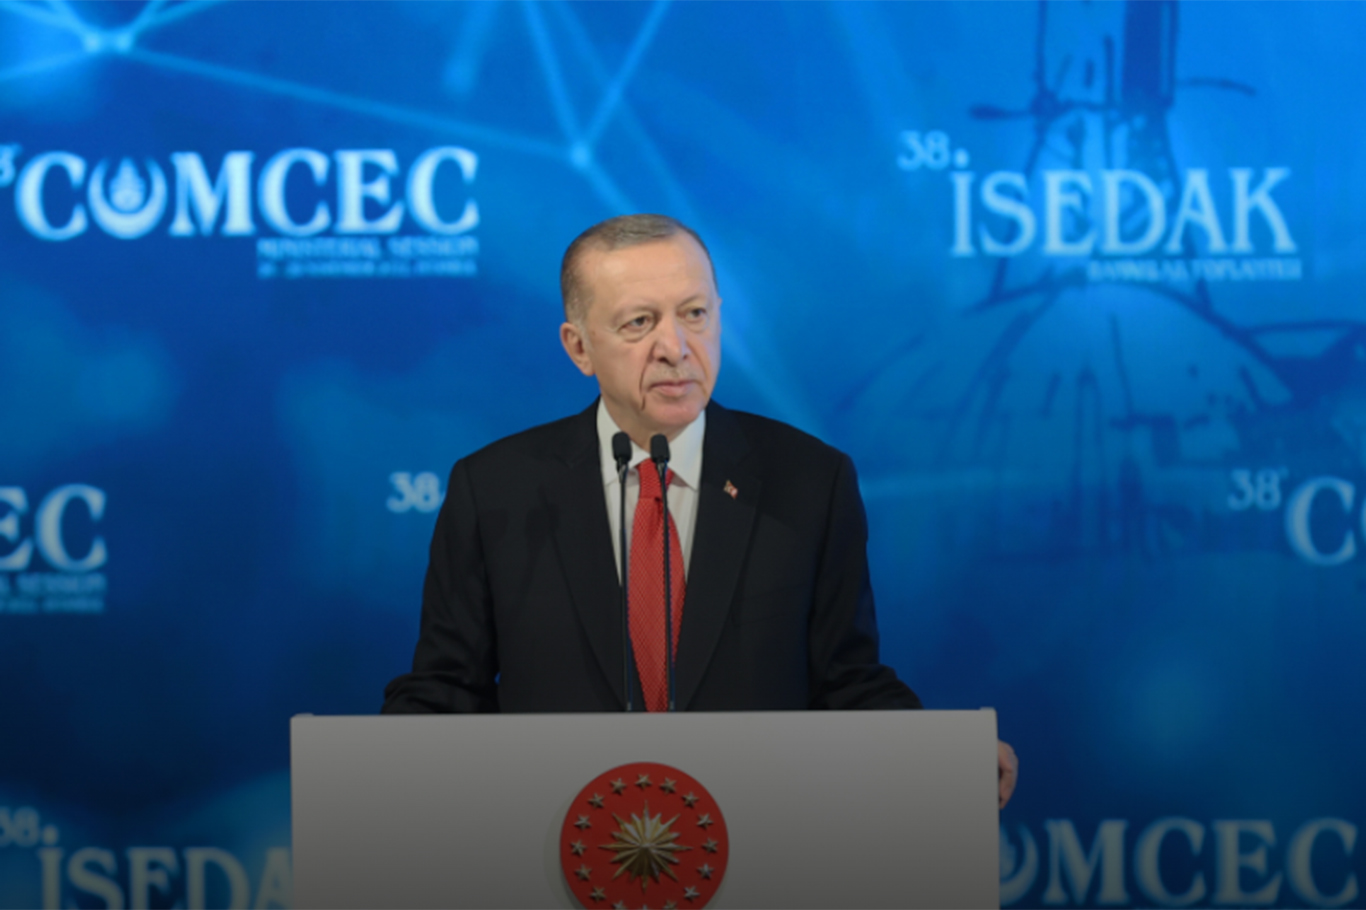 Islamic countries have capability to overcome all disagreements, and differences, Erdoğan says